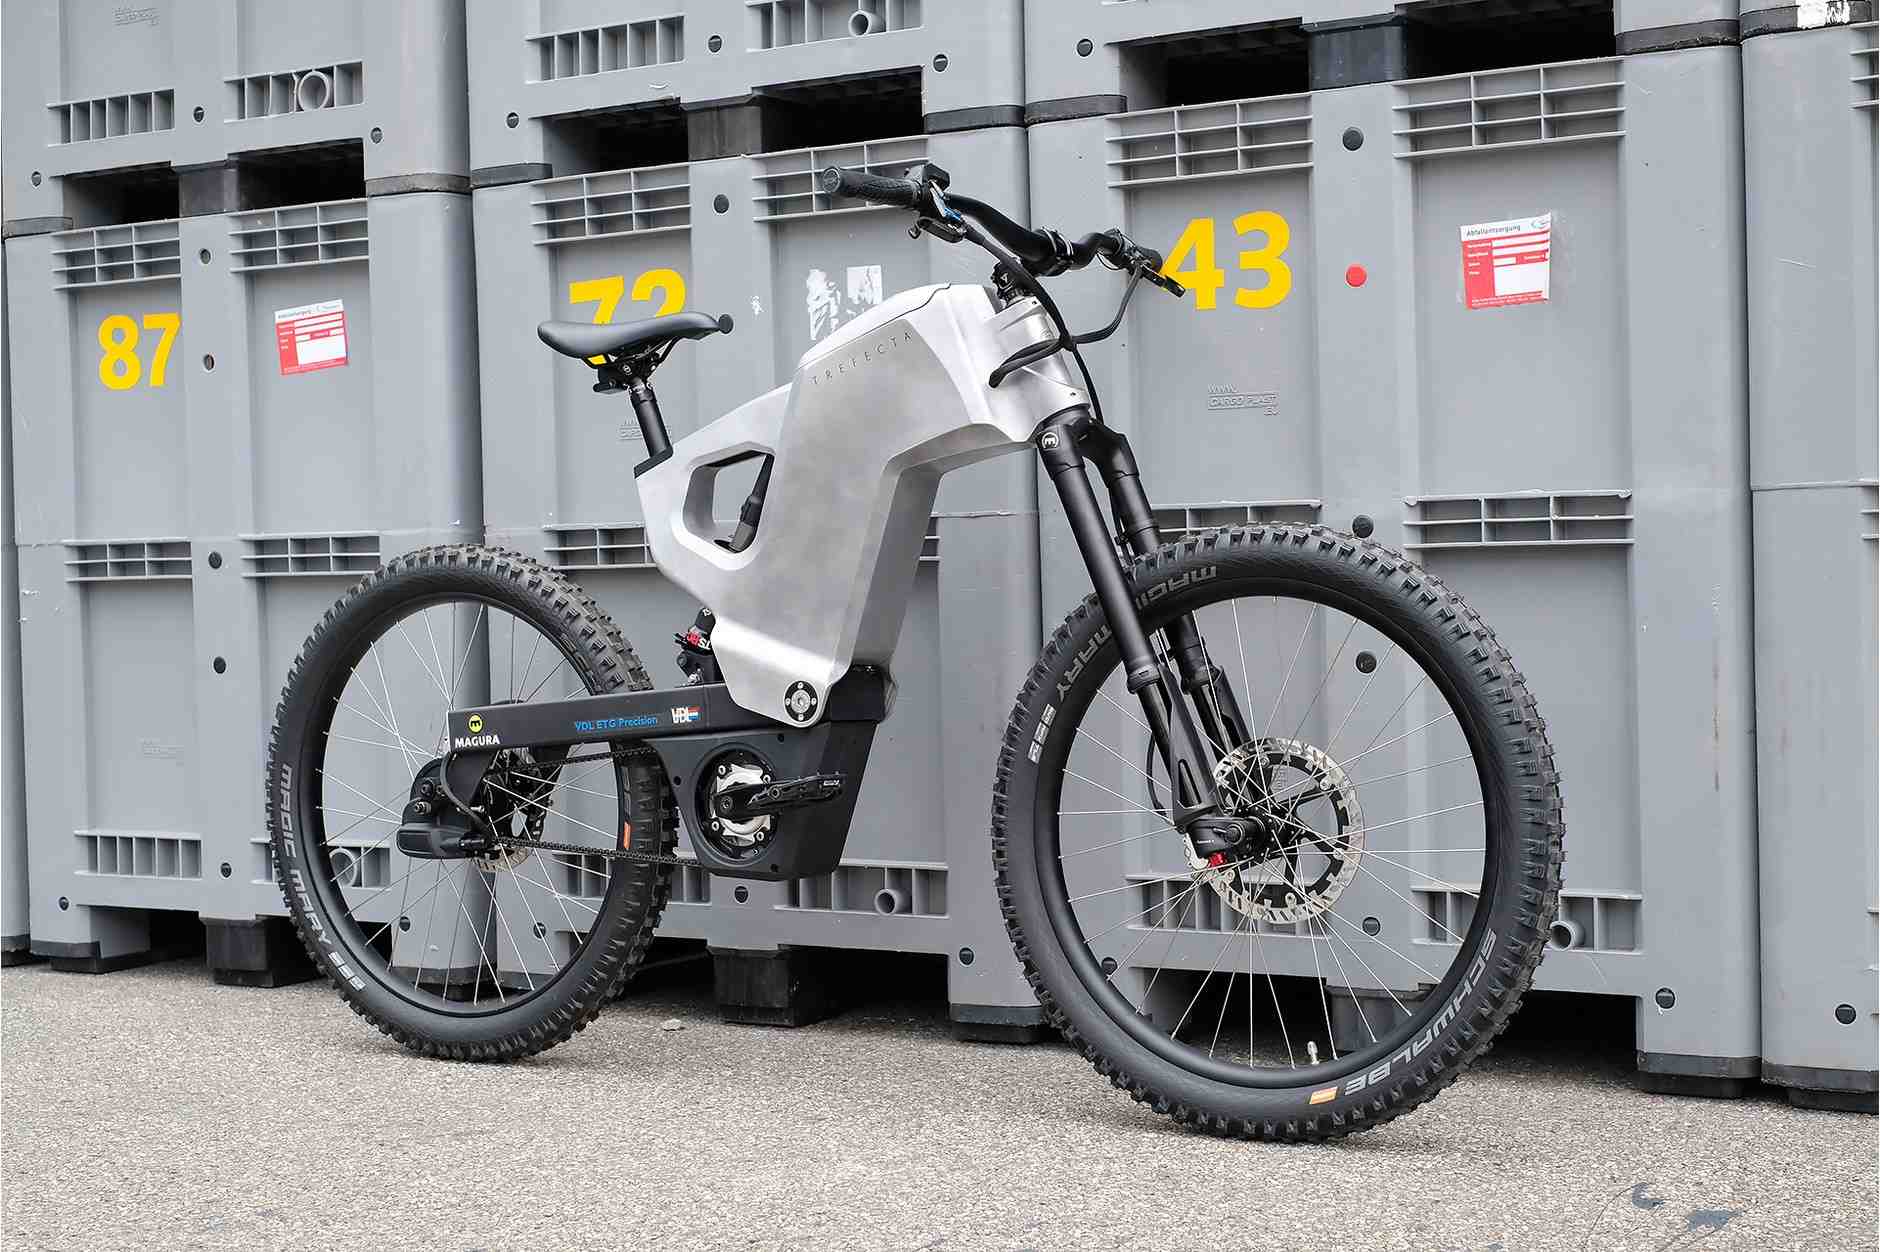 How much is an electric trike?